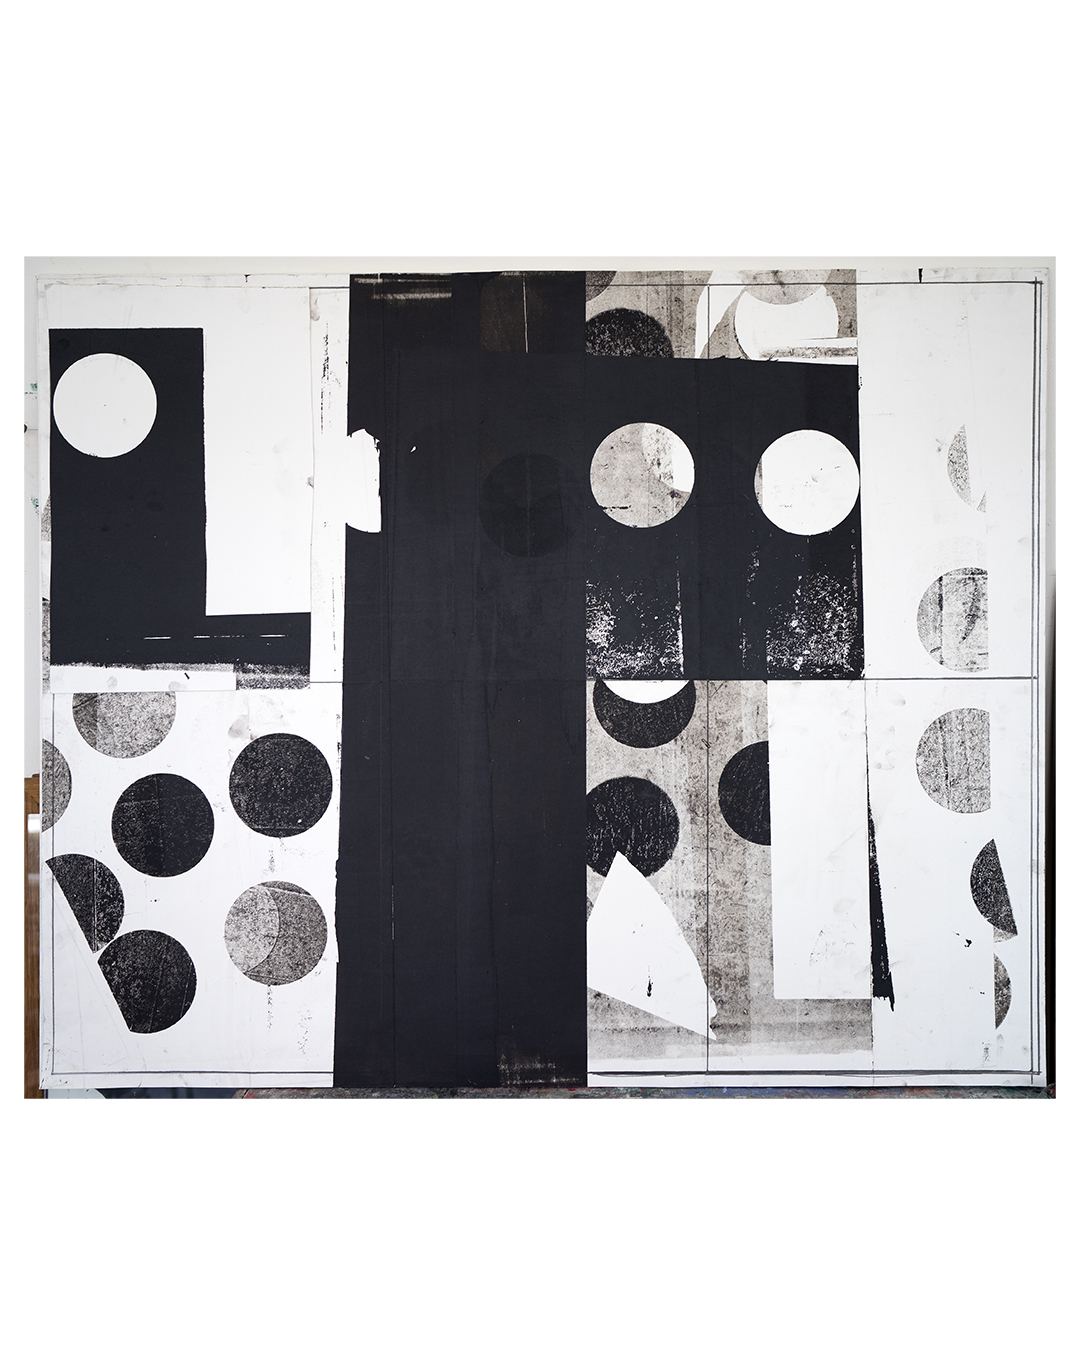 Piet Dieleman, untitled, 2020, collage, oil-based monotype ink, pencil, acrylic binder on paper, 1290 x 1590 mm, €3270